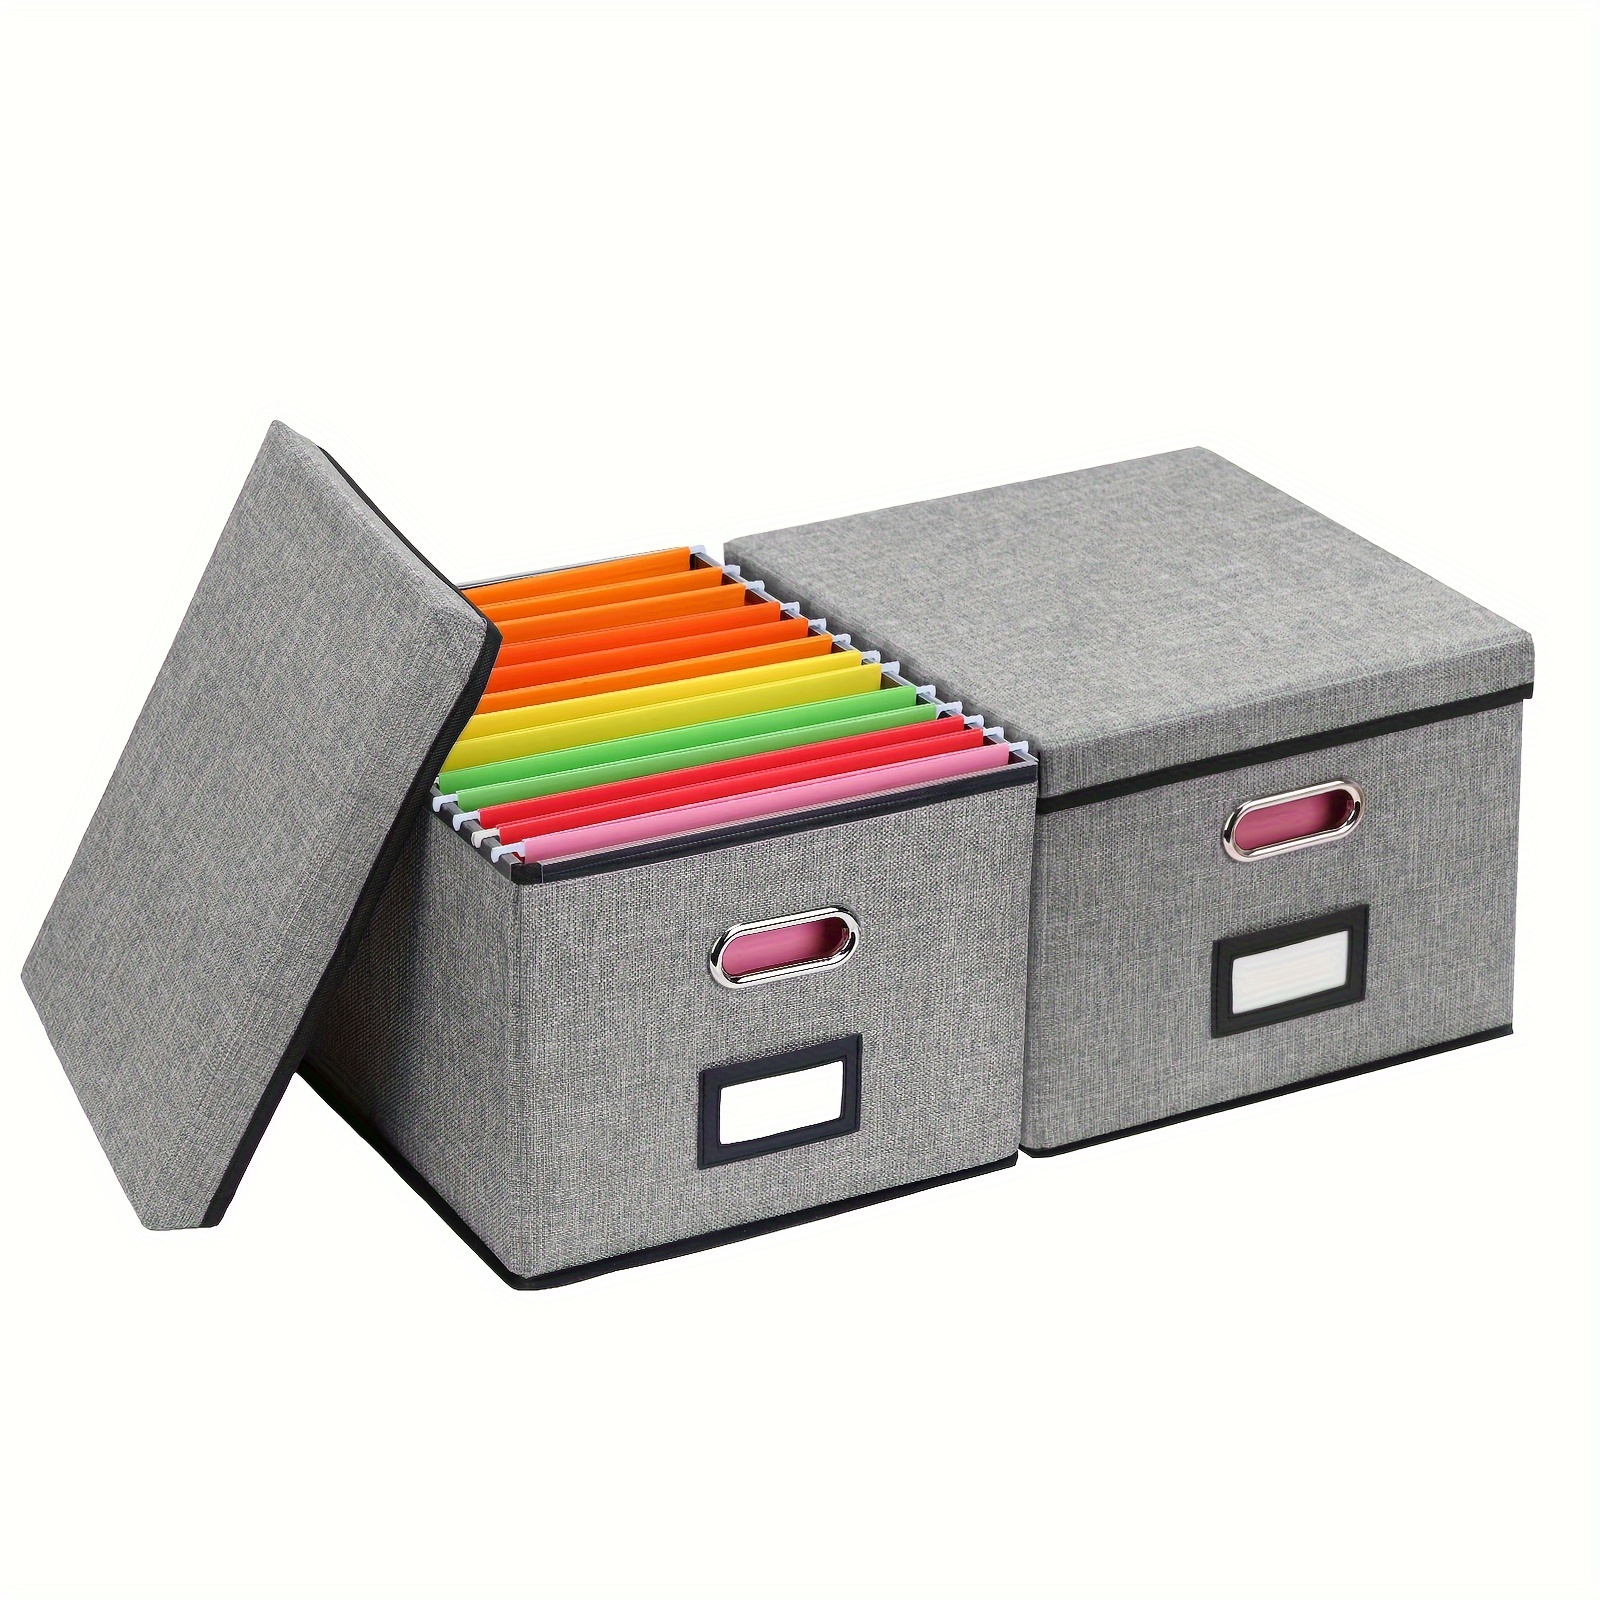 

2 Pack Dark Gray File Organizer Box, File Box For Hanging Files, File Organizer Box With Handles, Prevent Loosening And Facilitate The Sliding Of File Folders, File Storage Organizer For Letter/legal